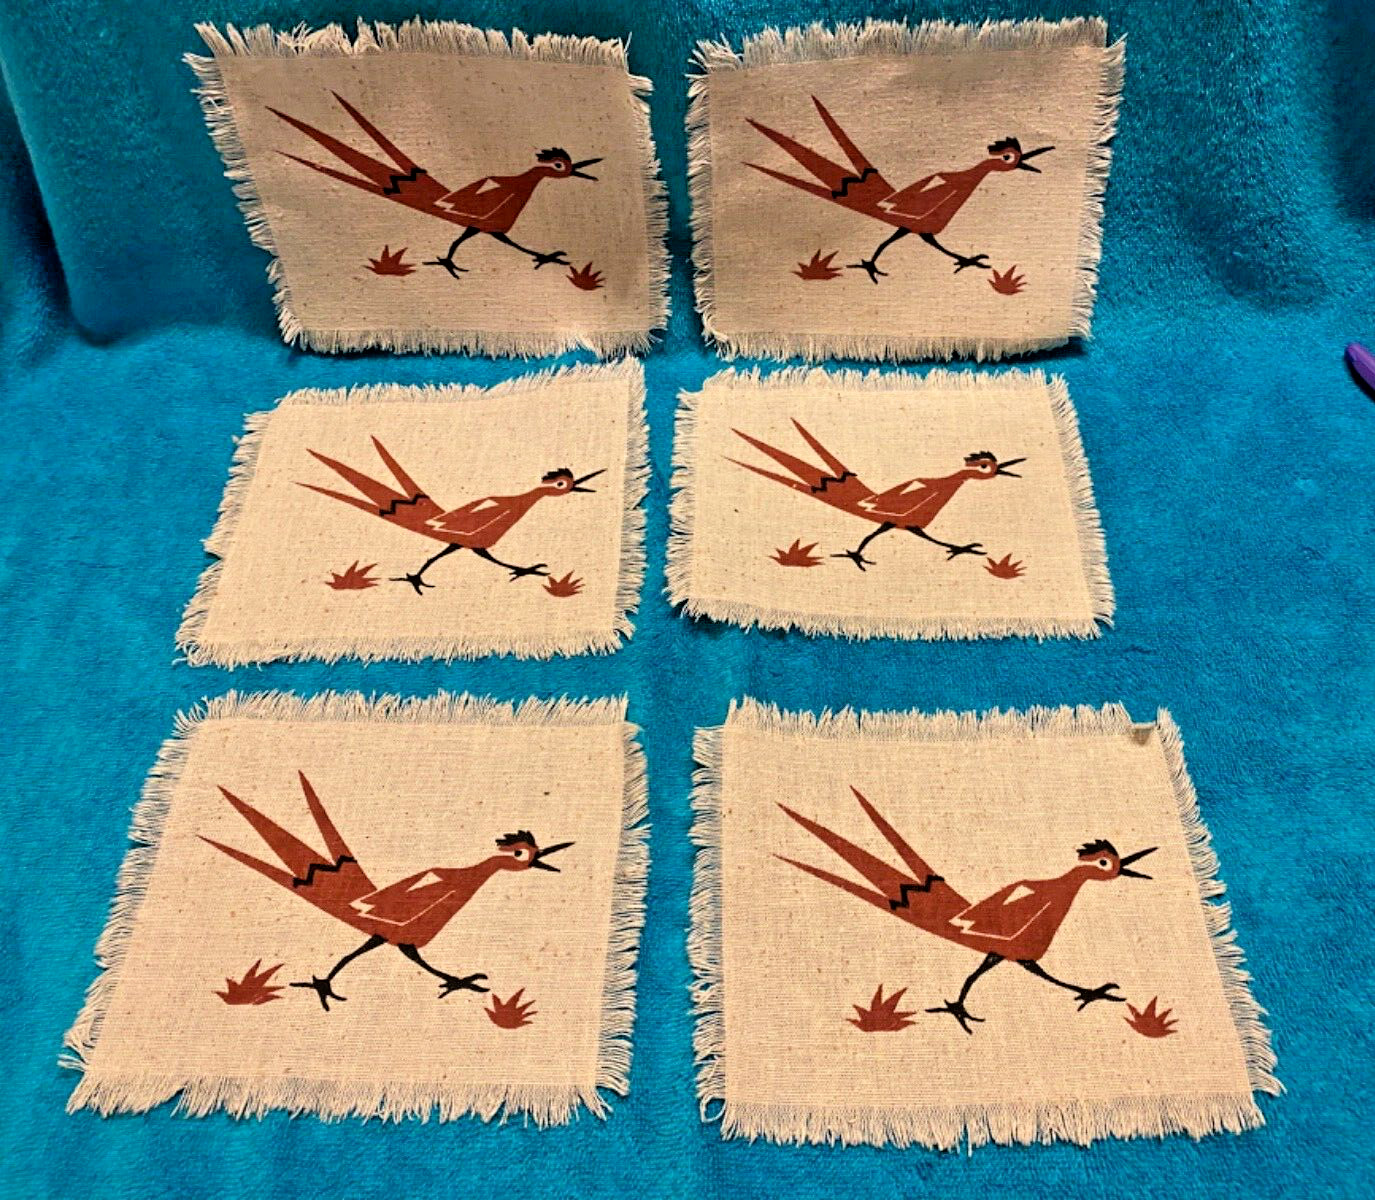 Lot of 6 Vintage RUNNING ROAD RUNNER Fabric Pieces (6.5 x 5.5)